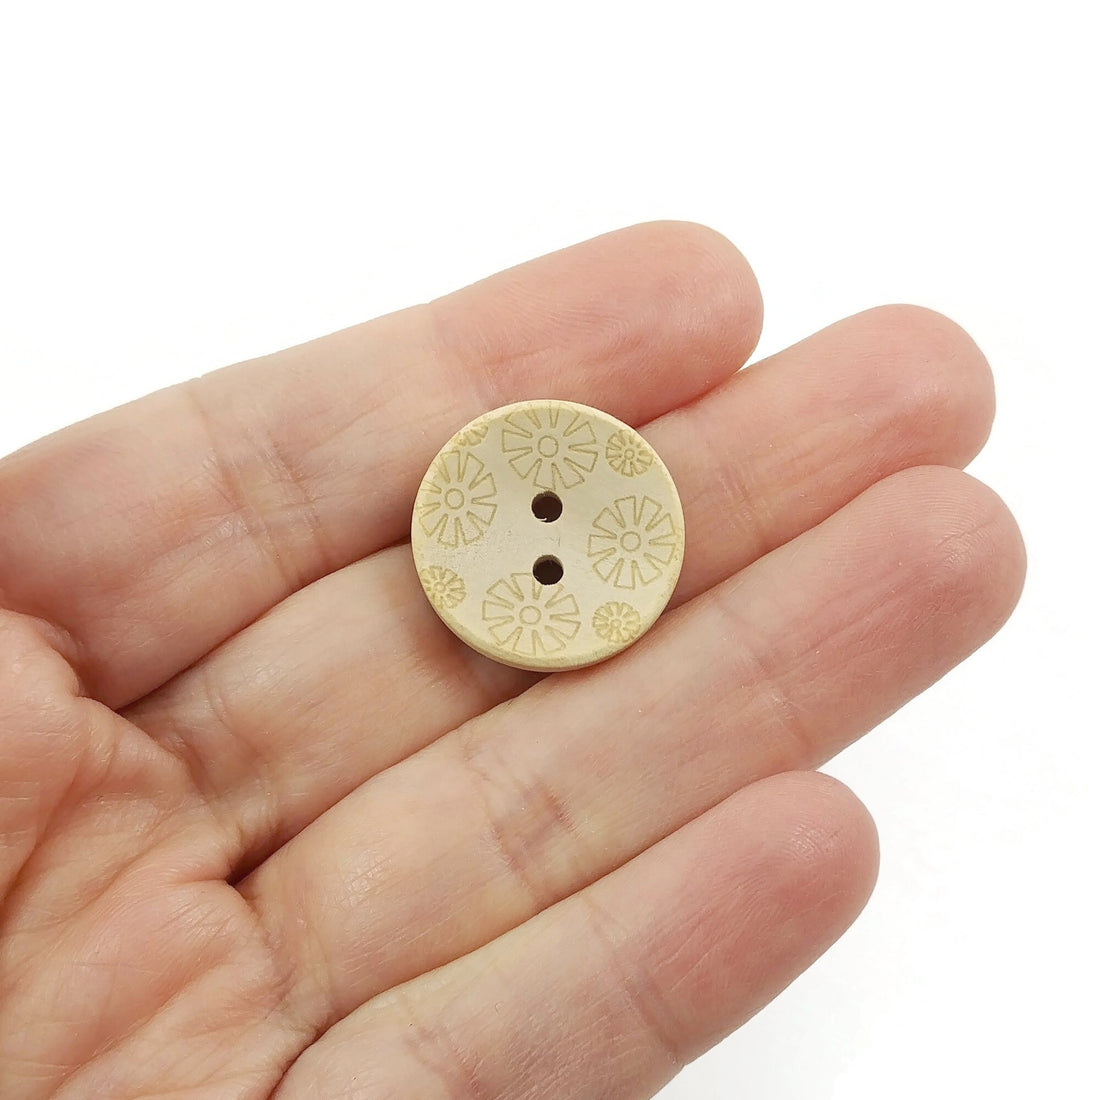 Wooden button - Flower Pattern Unfinished Wood Sewing Buttons Natural Color 20mm - set of 12